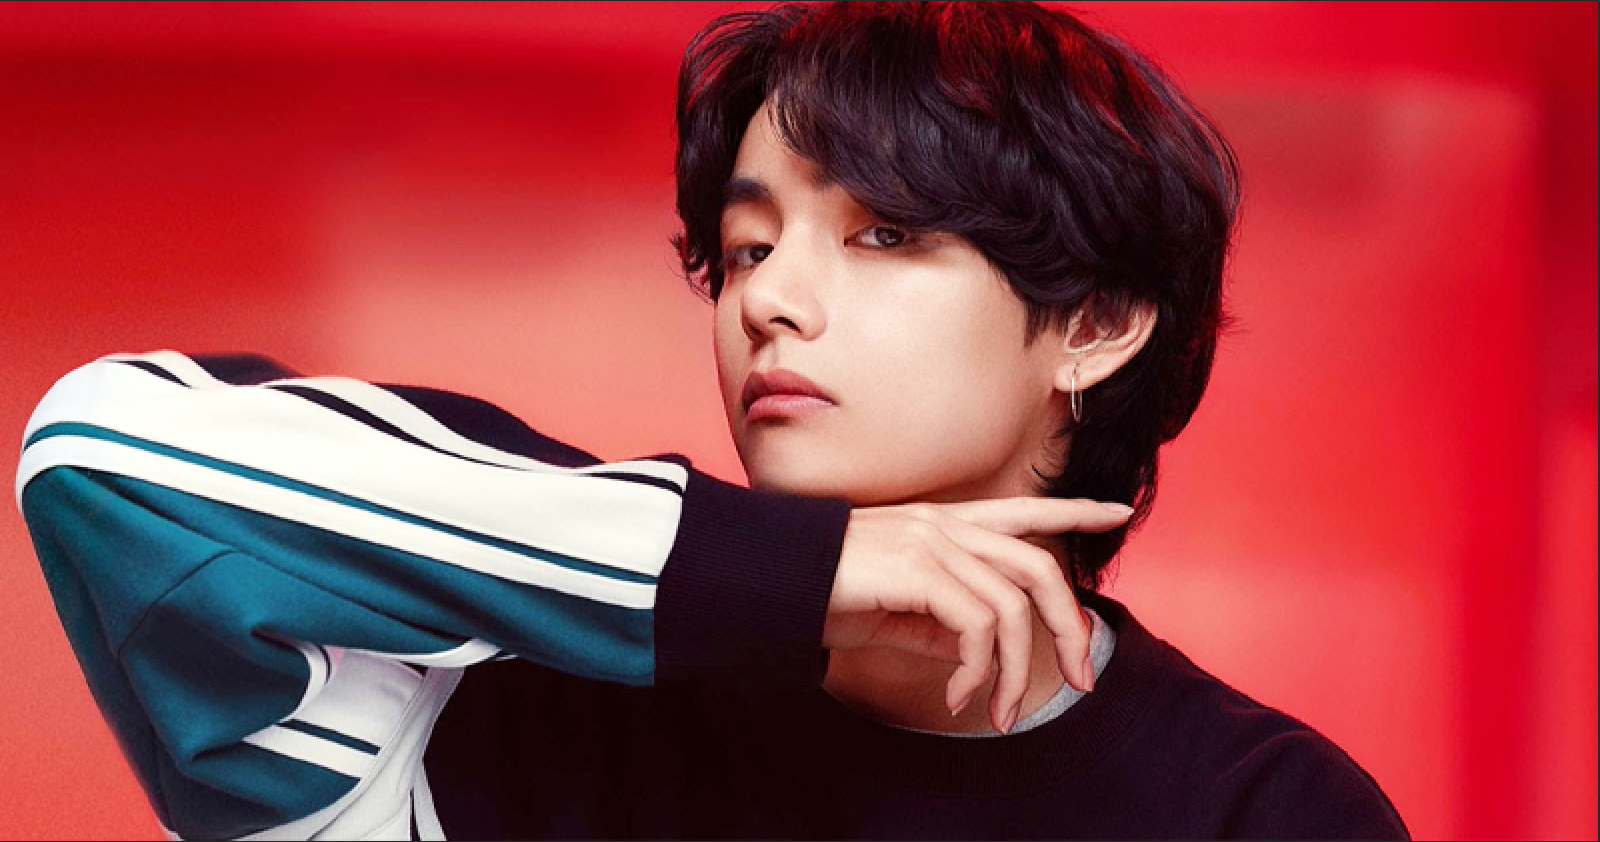 BTS V Breaks Two Guinness World Records with Instagram Followers